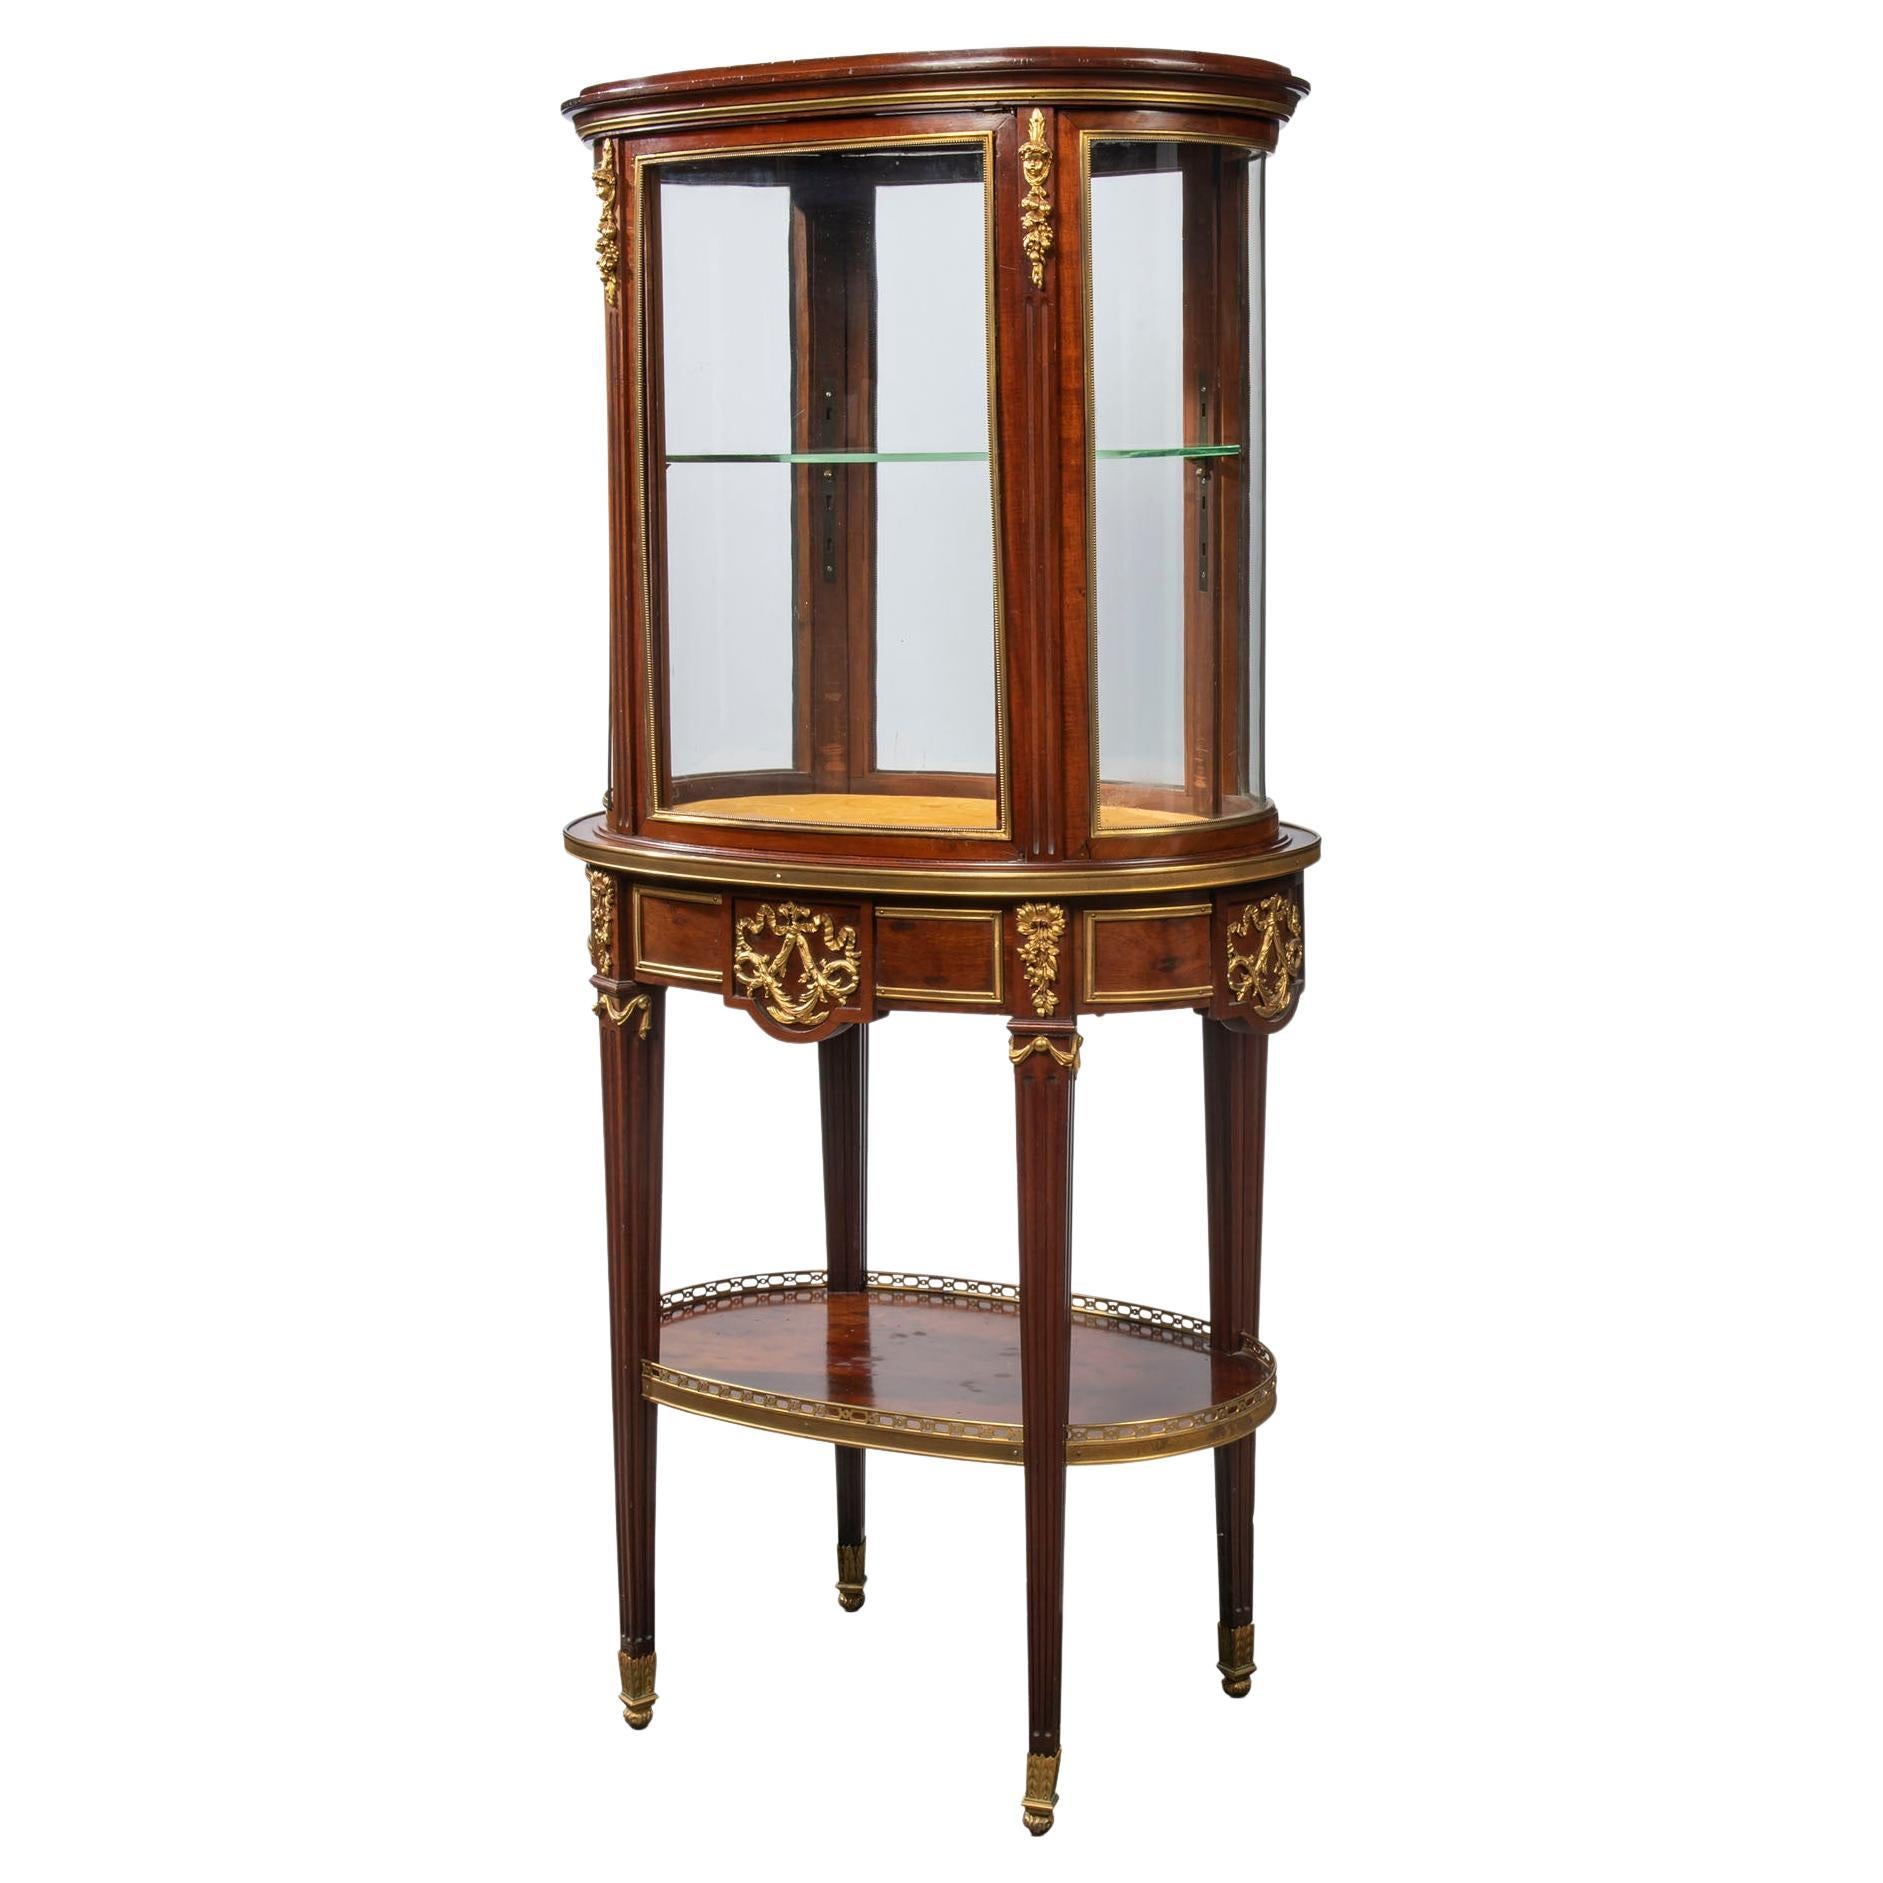 A Fine Louis XVI Style Centre Display Cabinet by Paul Sormani